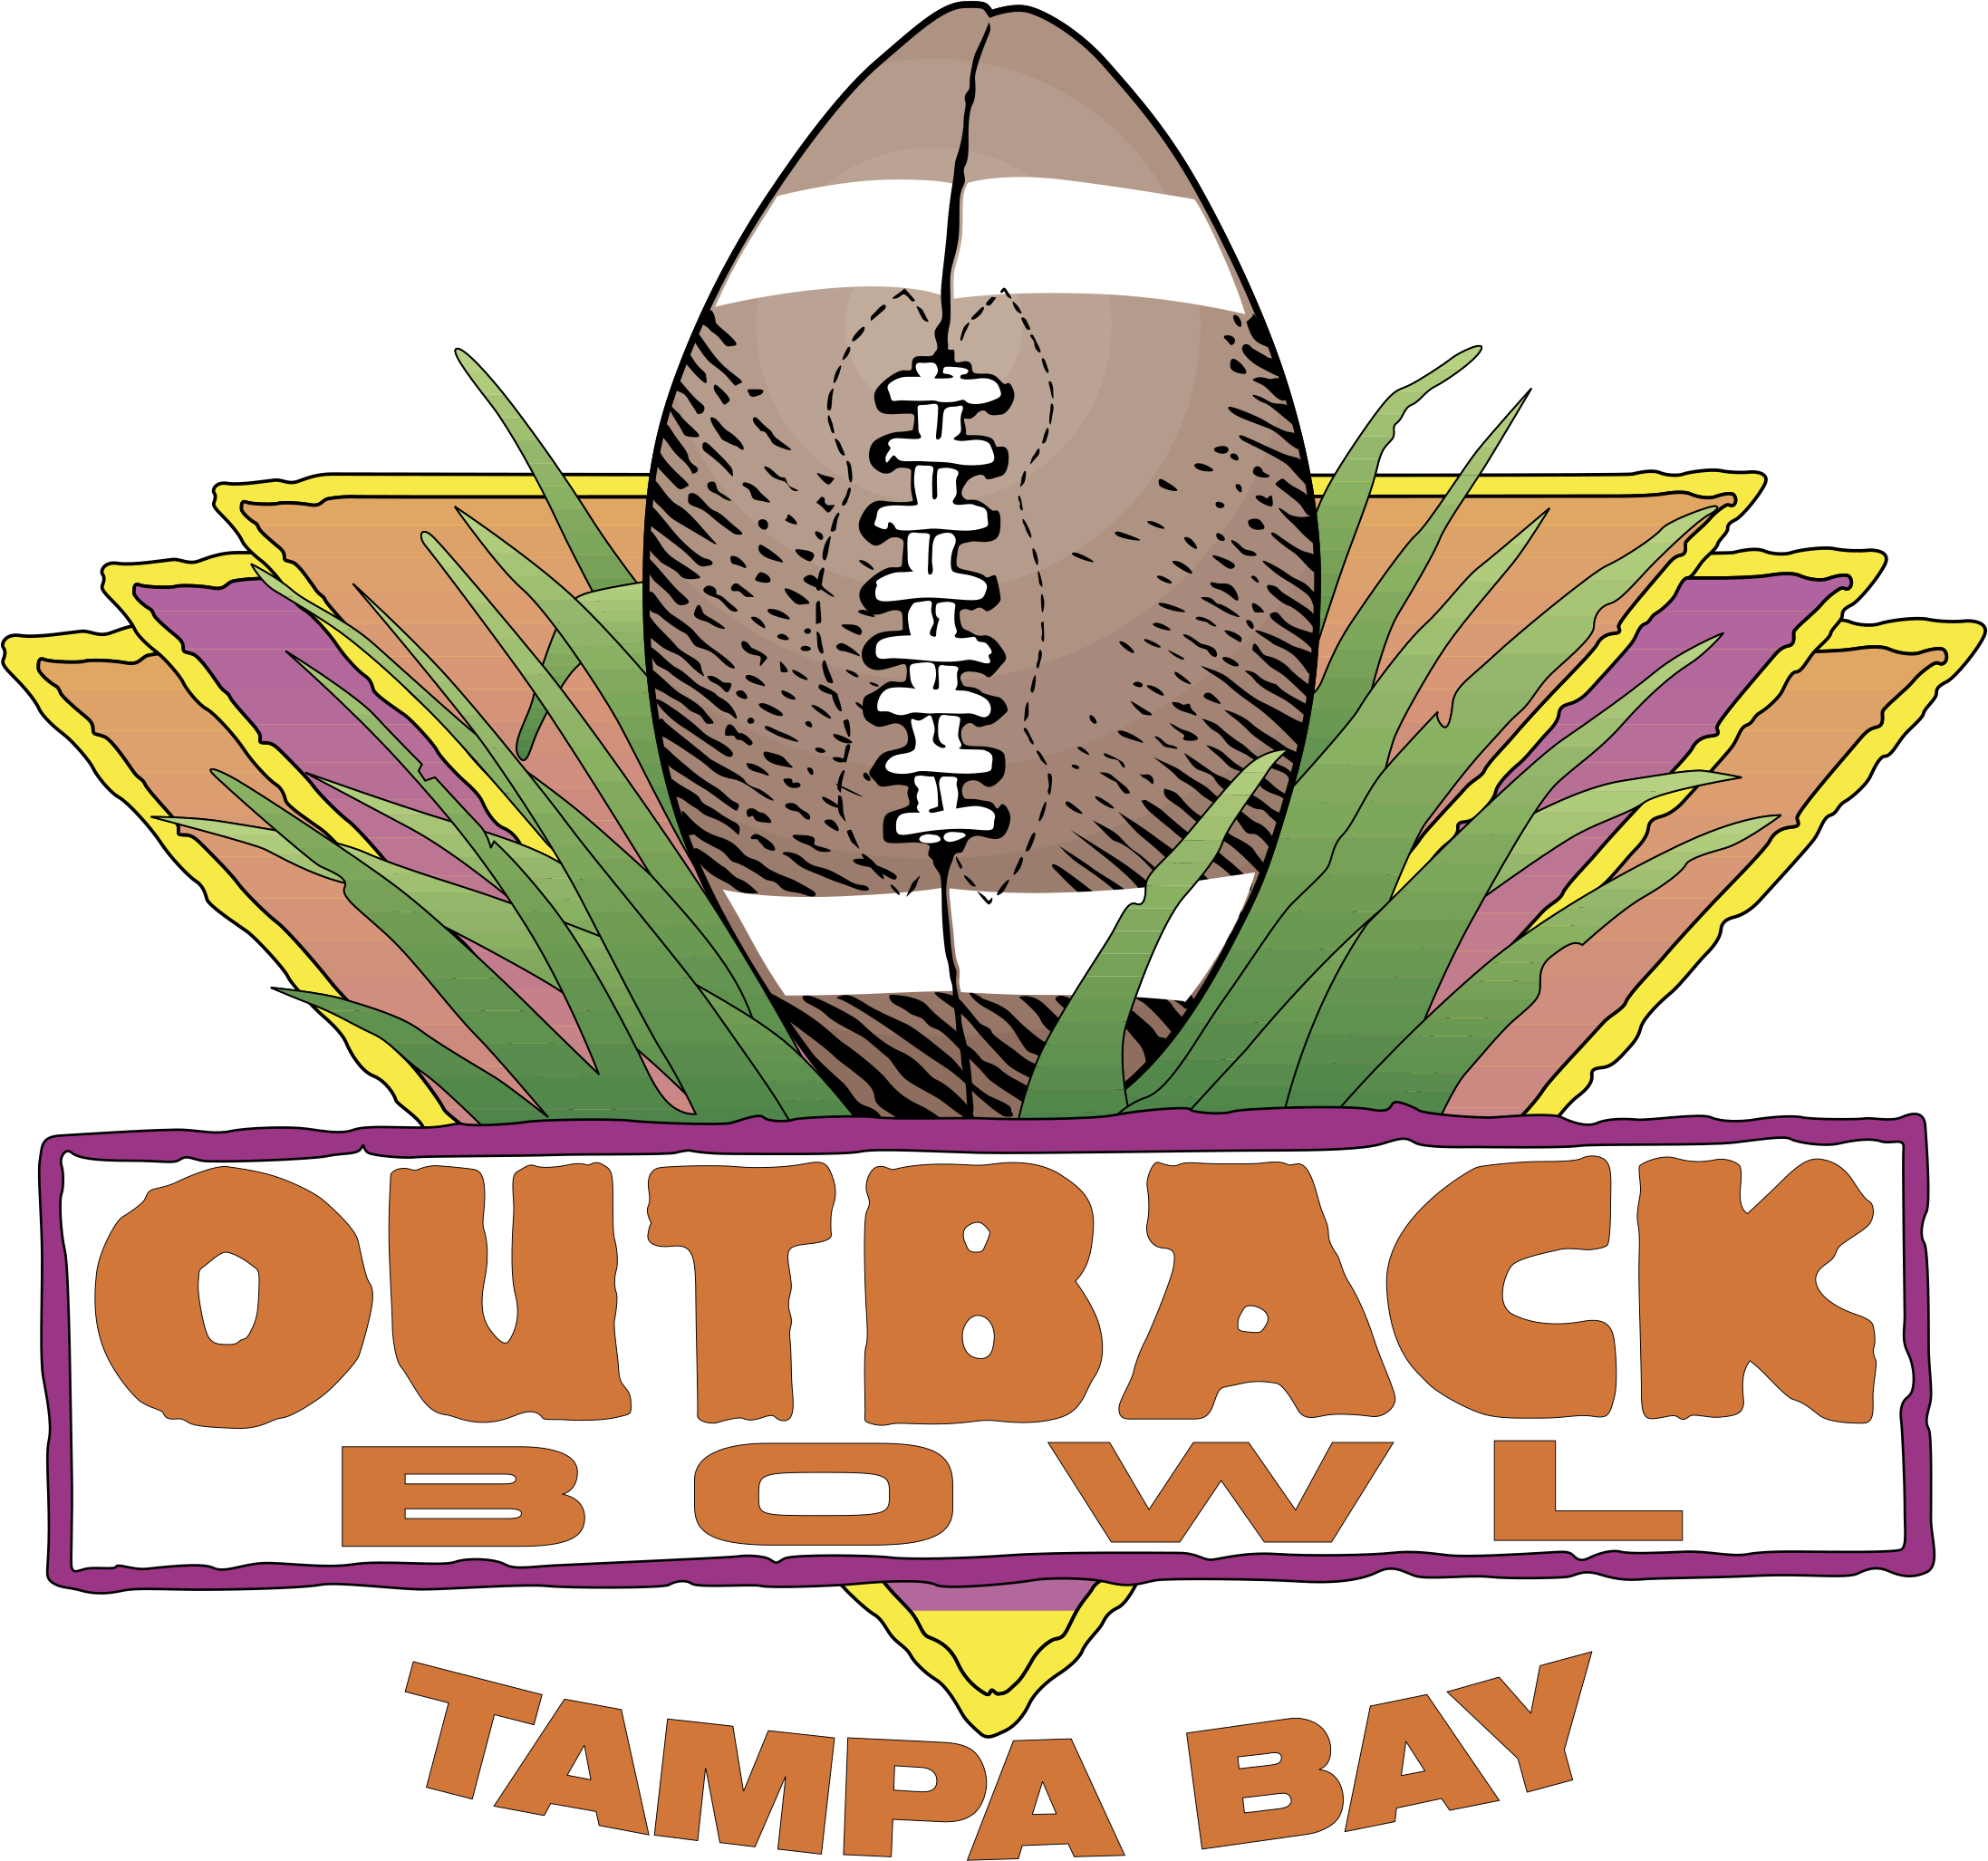 Outback Bowl Logo Png Transparent Outback Bowl Clipart Large Size Png Image PikPng